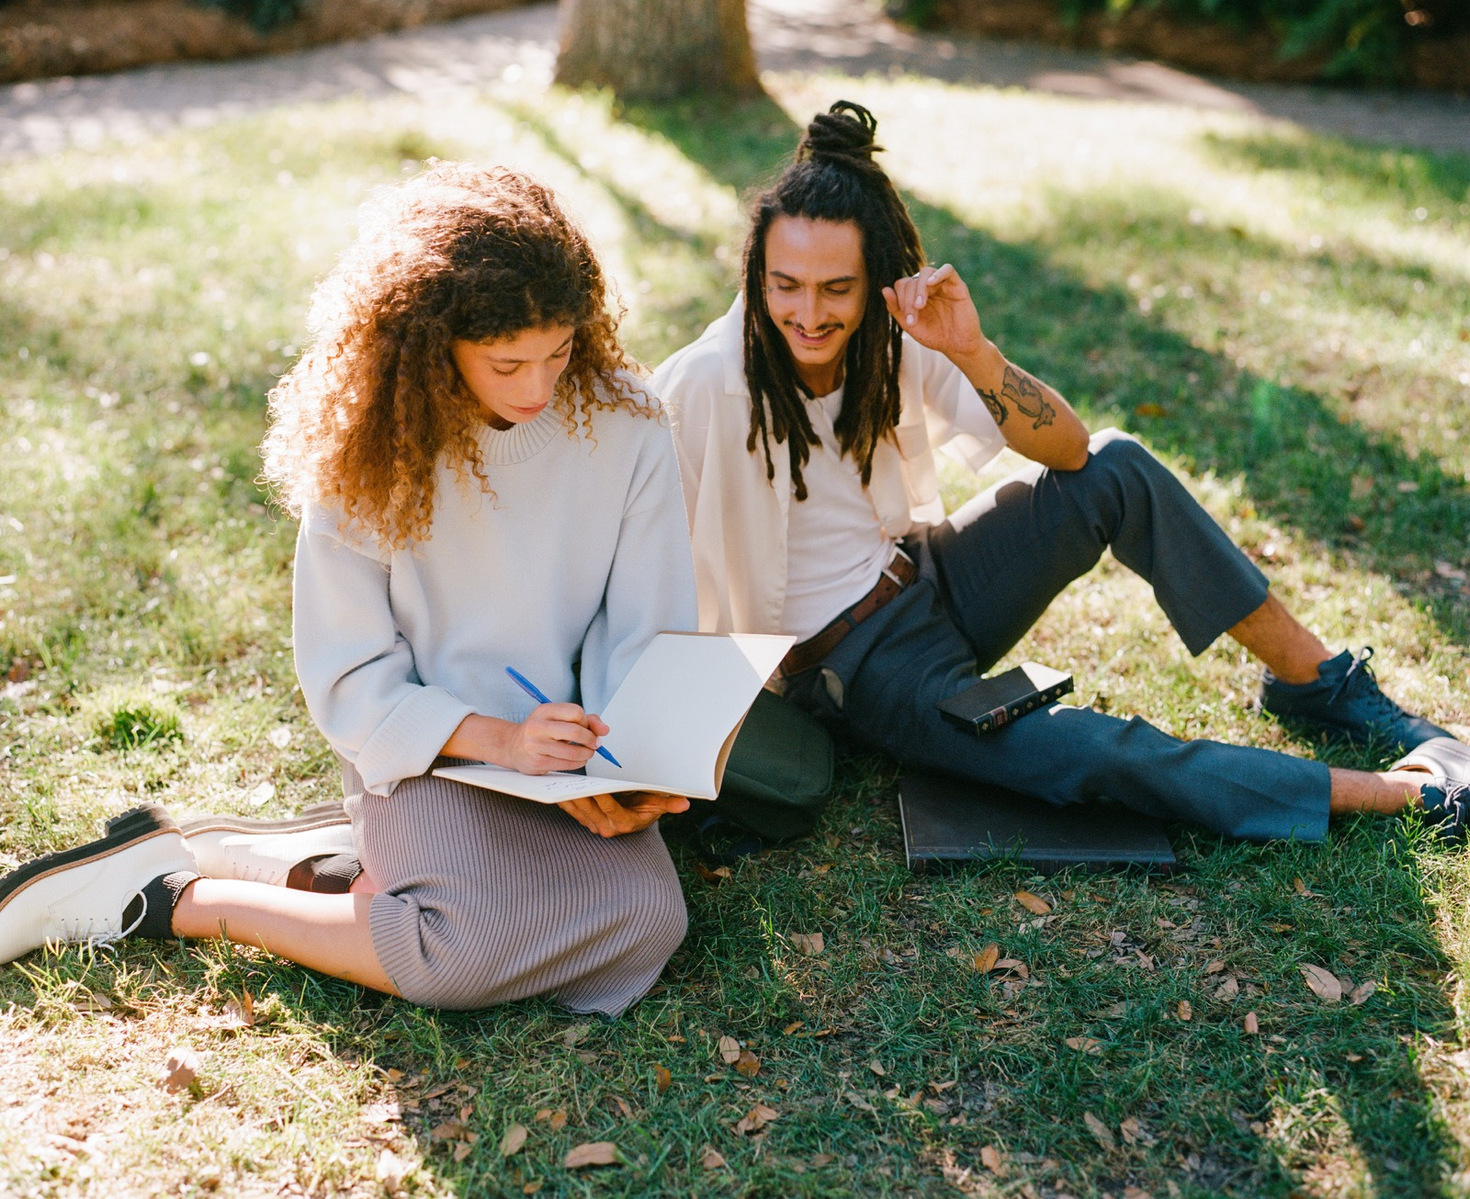 Two students sit together in a grassy lawn with BookBook products